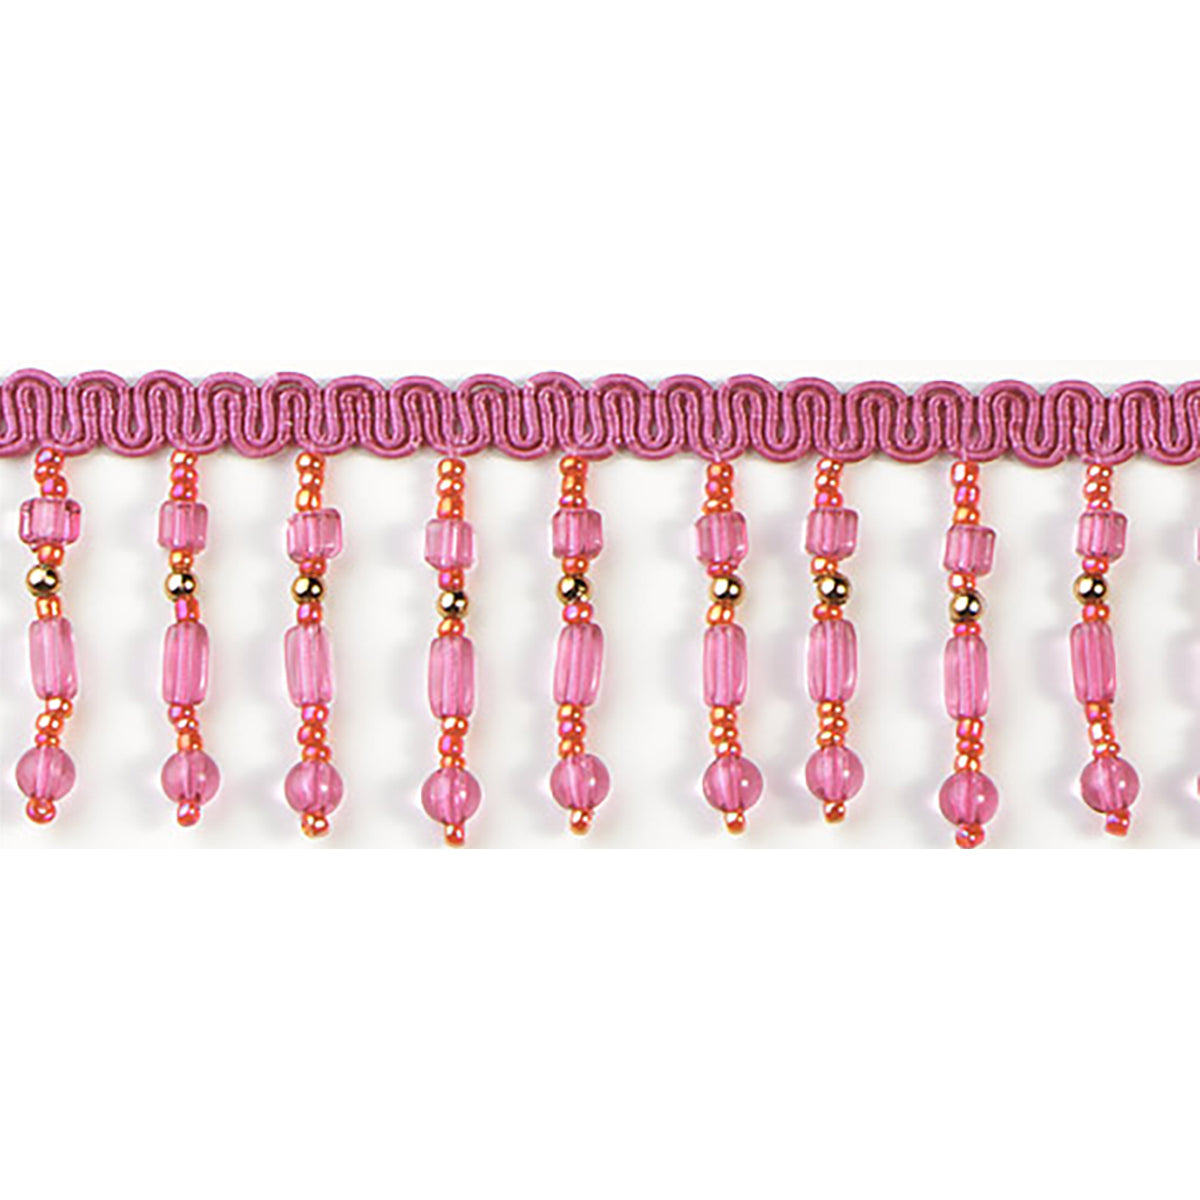 Braid with Beaded Fringe Trim (Sold by the Yard)